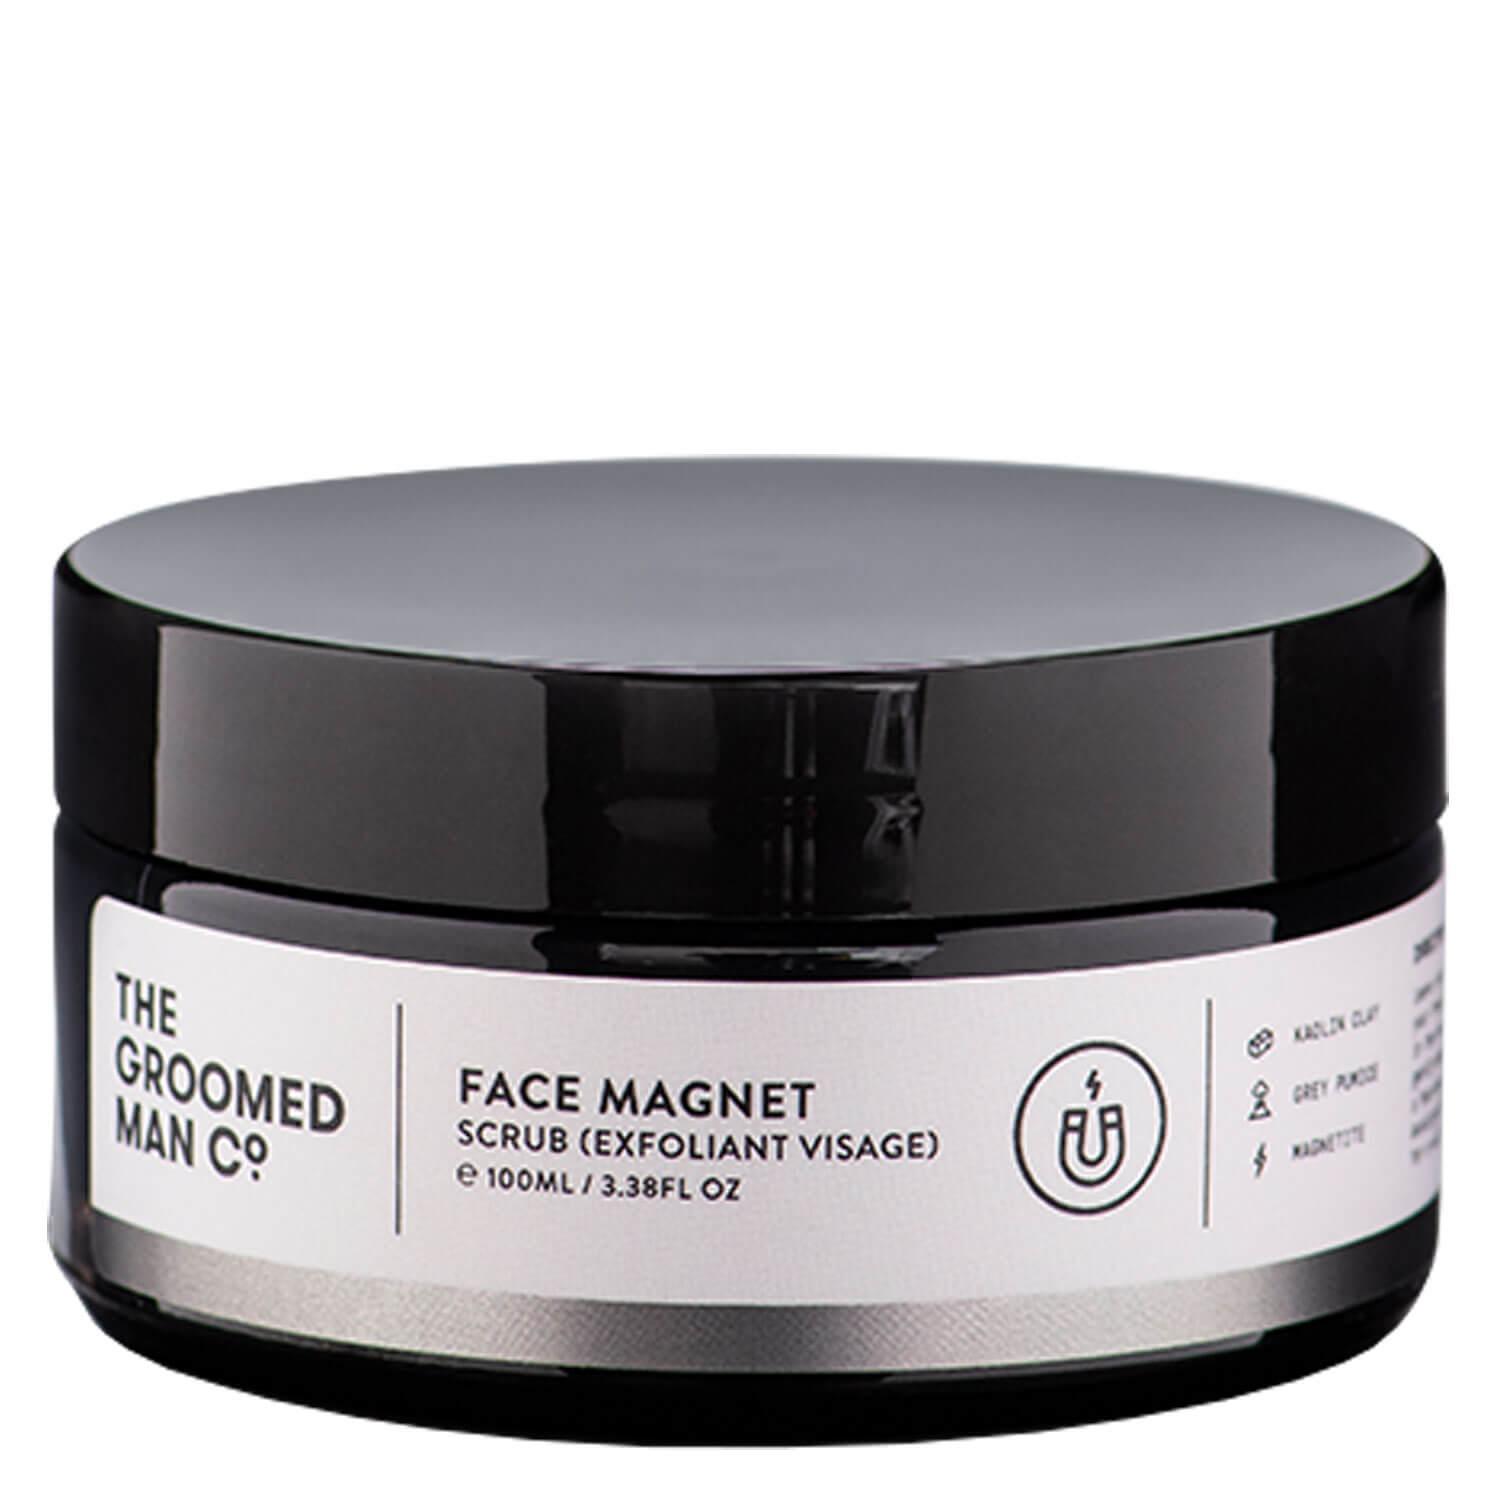 THE GROOMED MAN CO. - Face Magnet Scrub